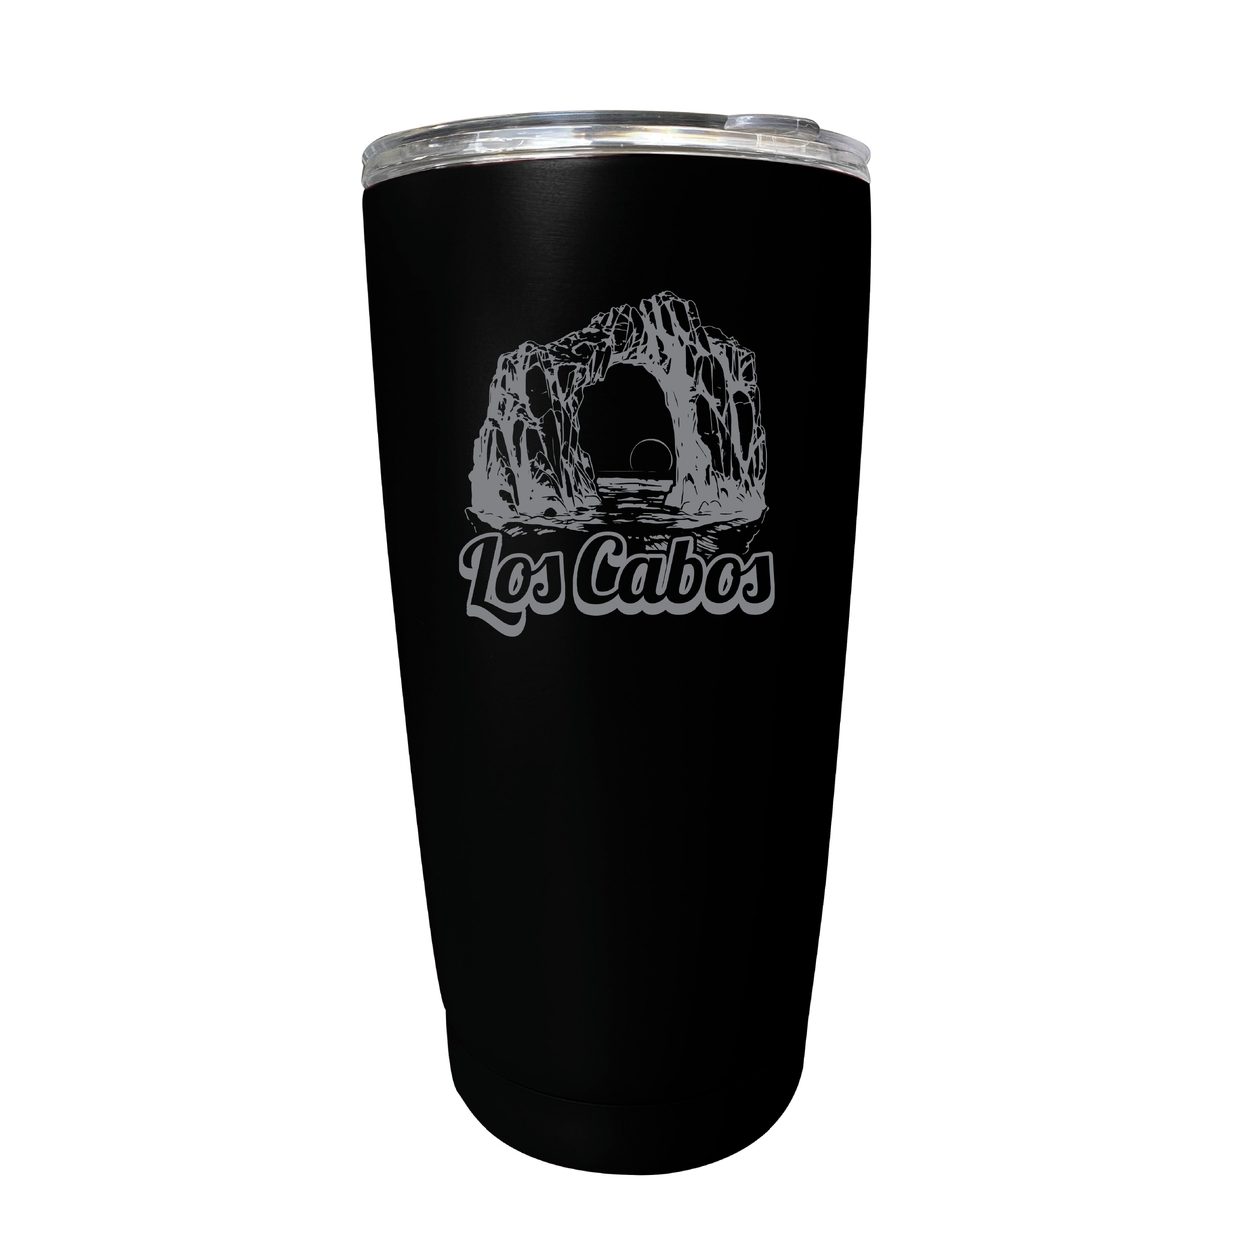 Los Cabos Mexico Souvenir 16 Oz Engraved Stainless Steel Insulated Tumbler - Black,,Single Unit